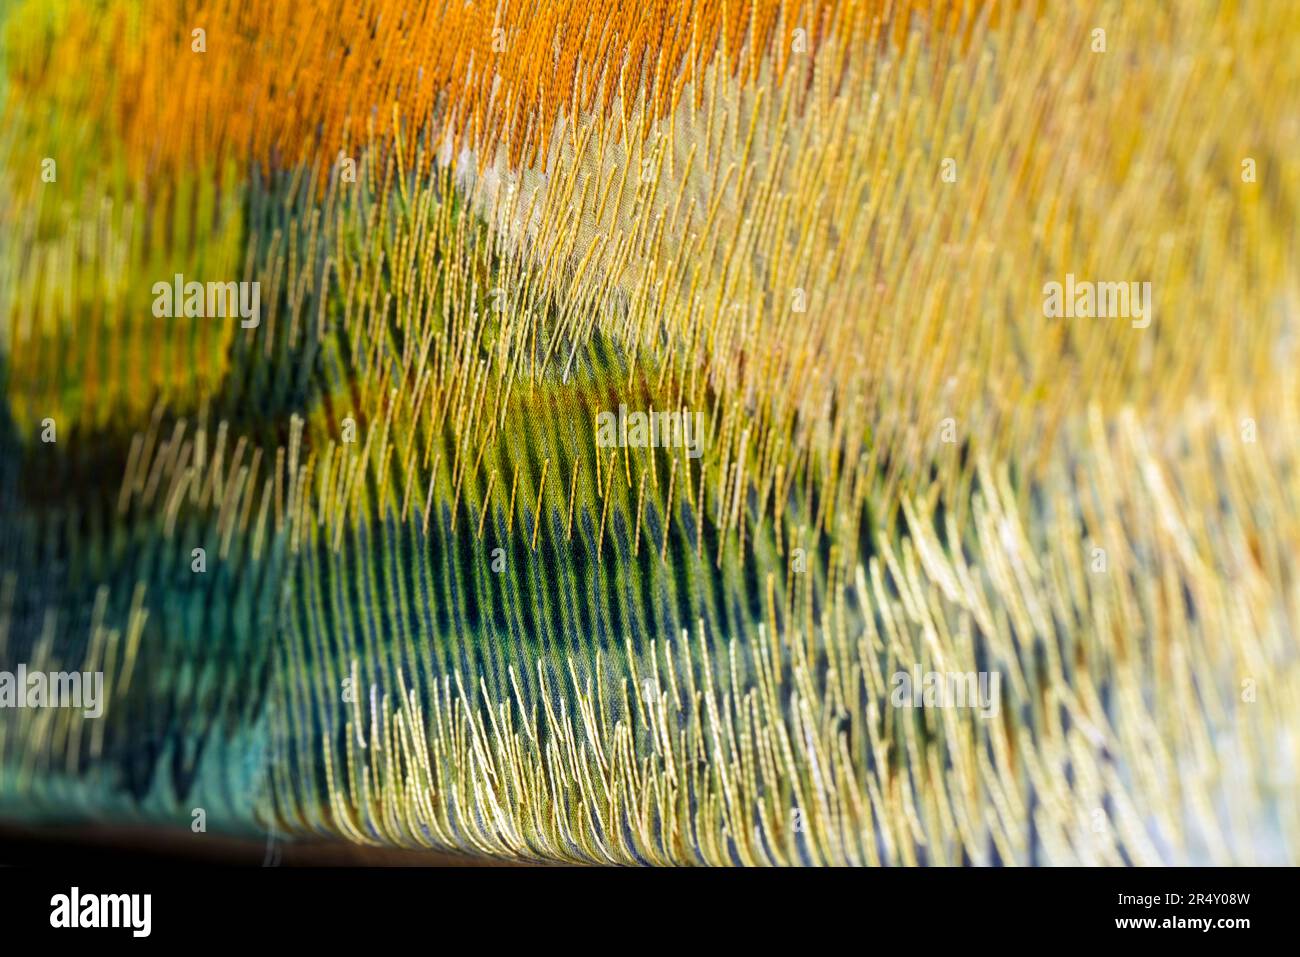 Colorful abstract close-up of fiber art piece Stock Photo